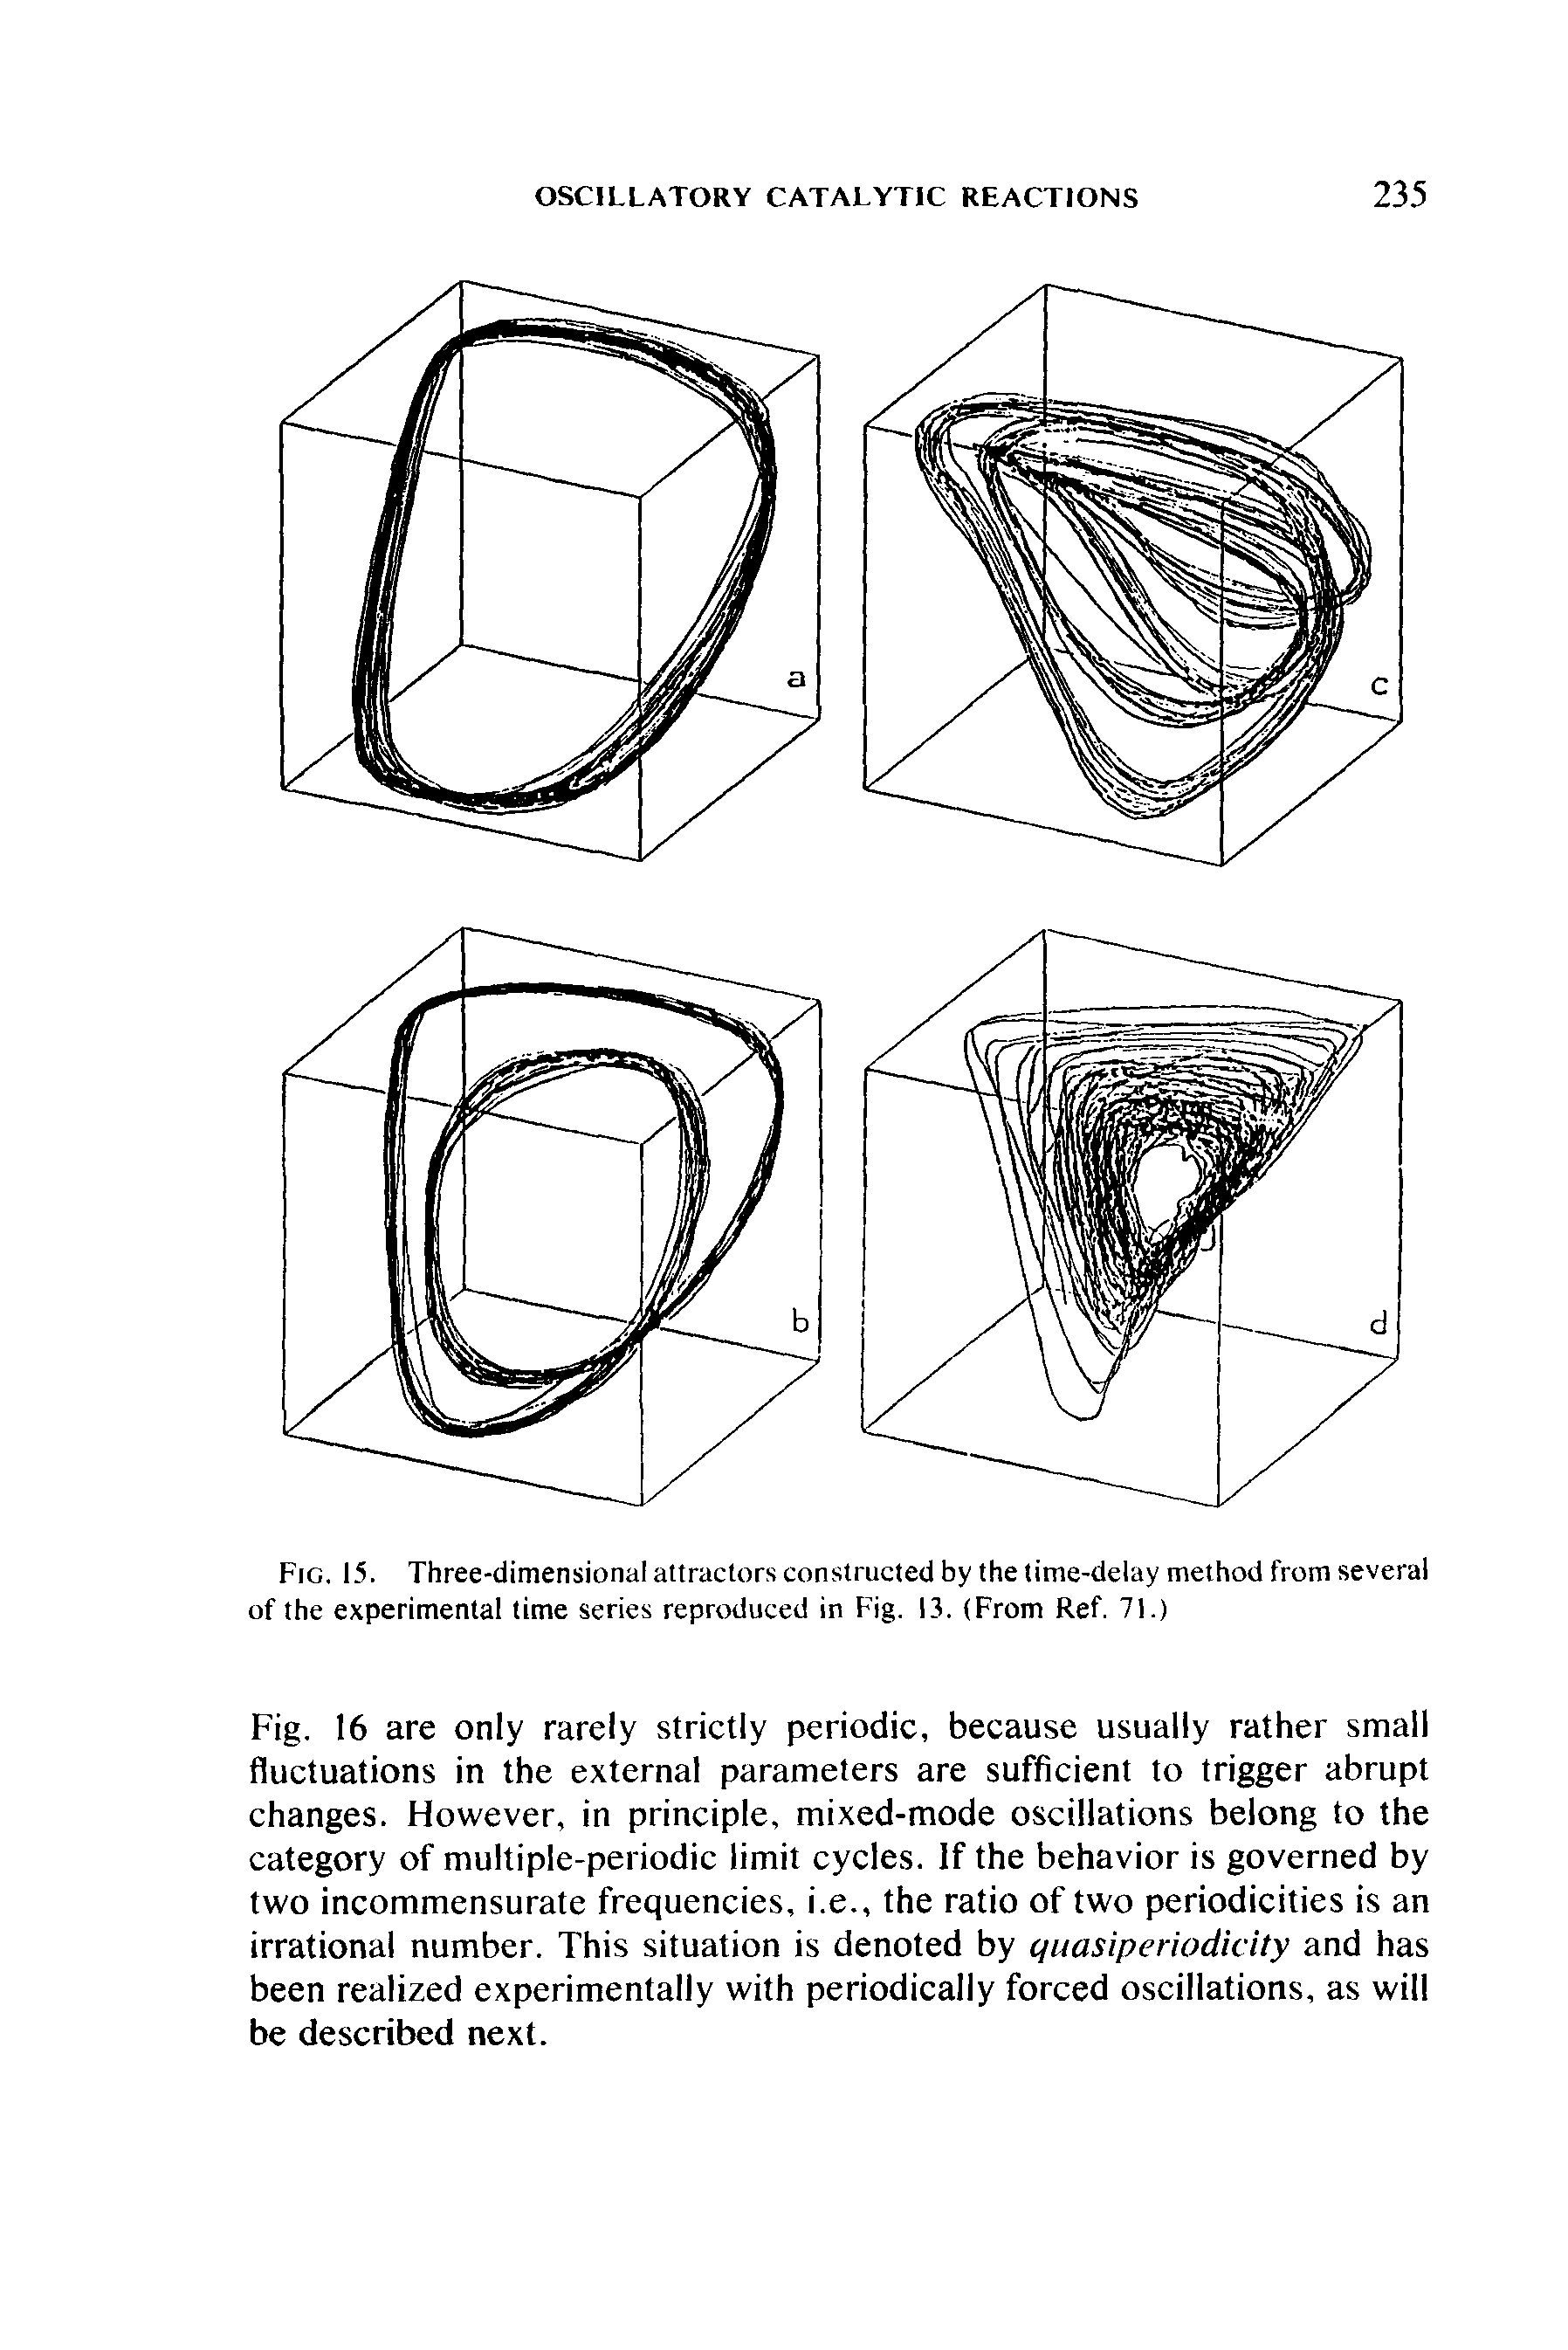 Fig. 15. Three-dimensional attractors constructed by the time-delay method from several of the experimental time series reproduced in Fig. 13. (From Ref. 71.)...